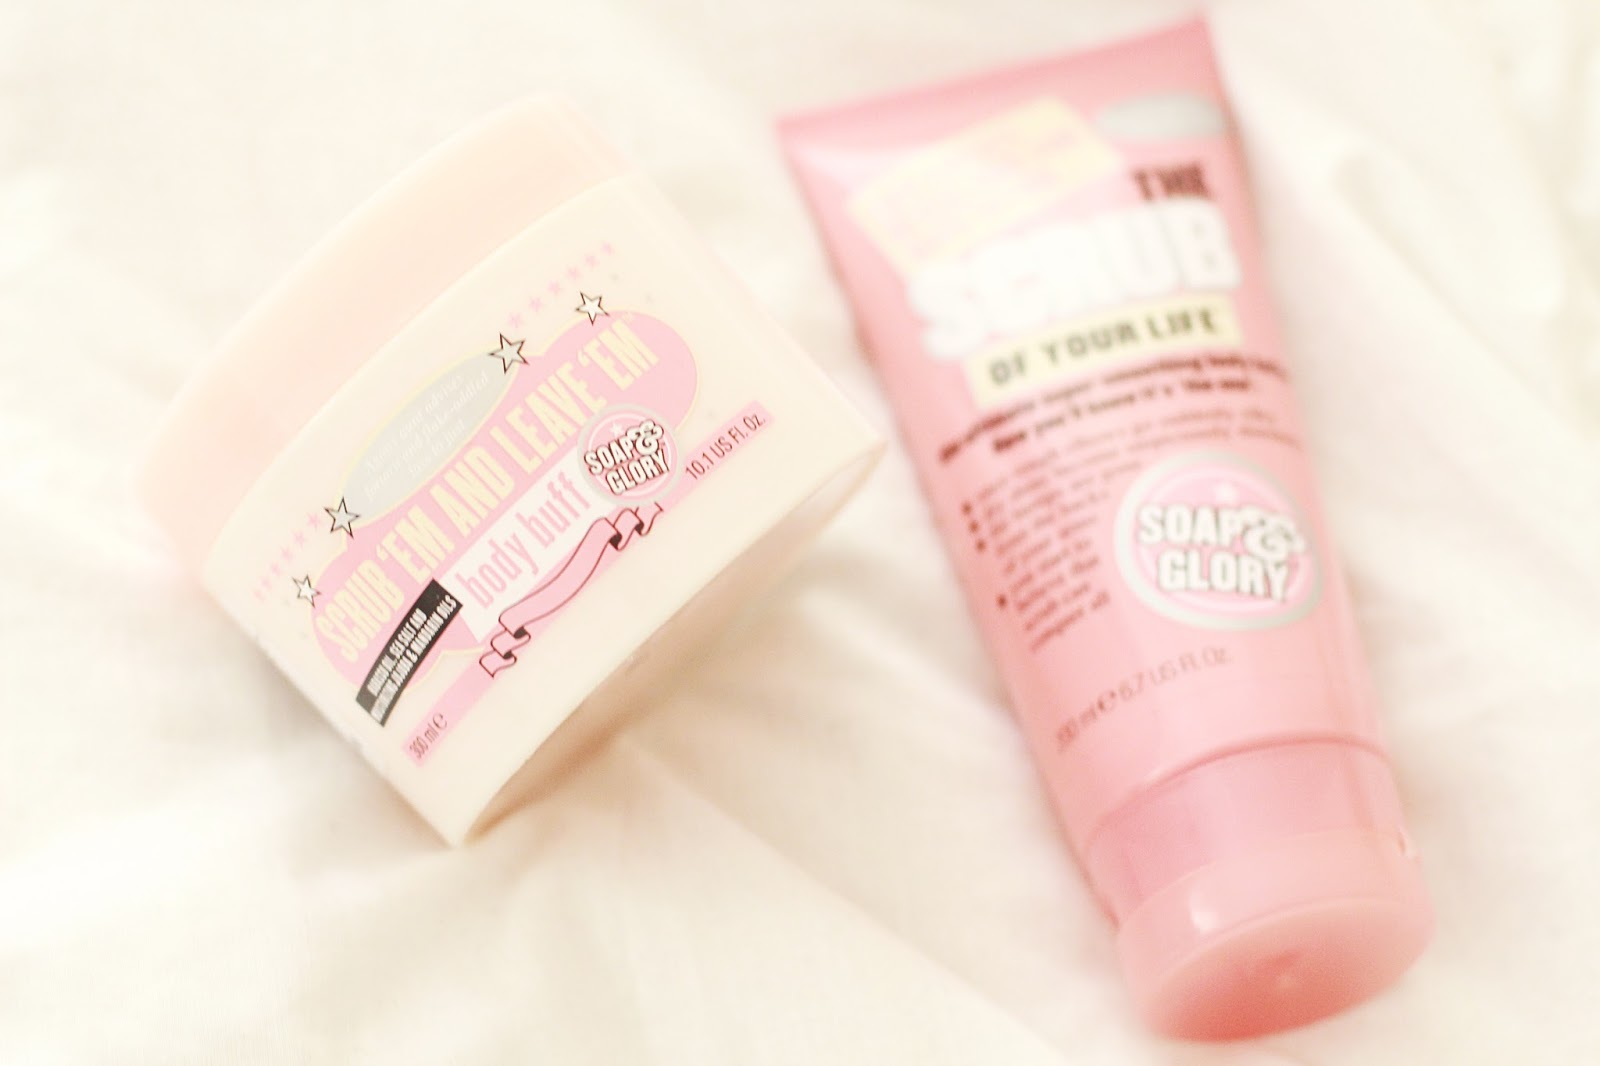 gommage soap and glory